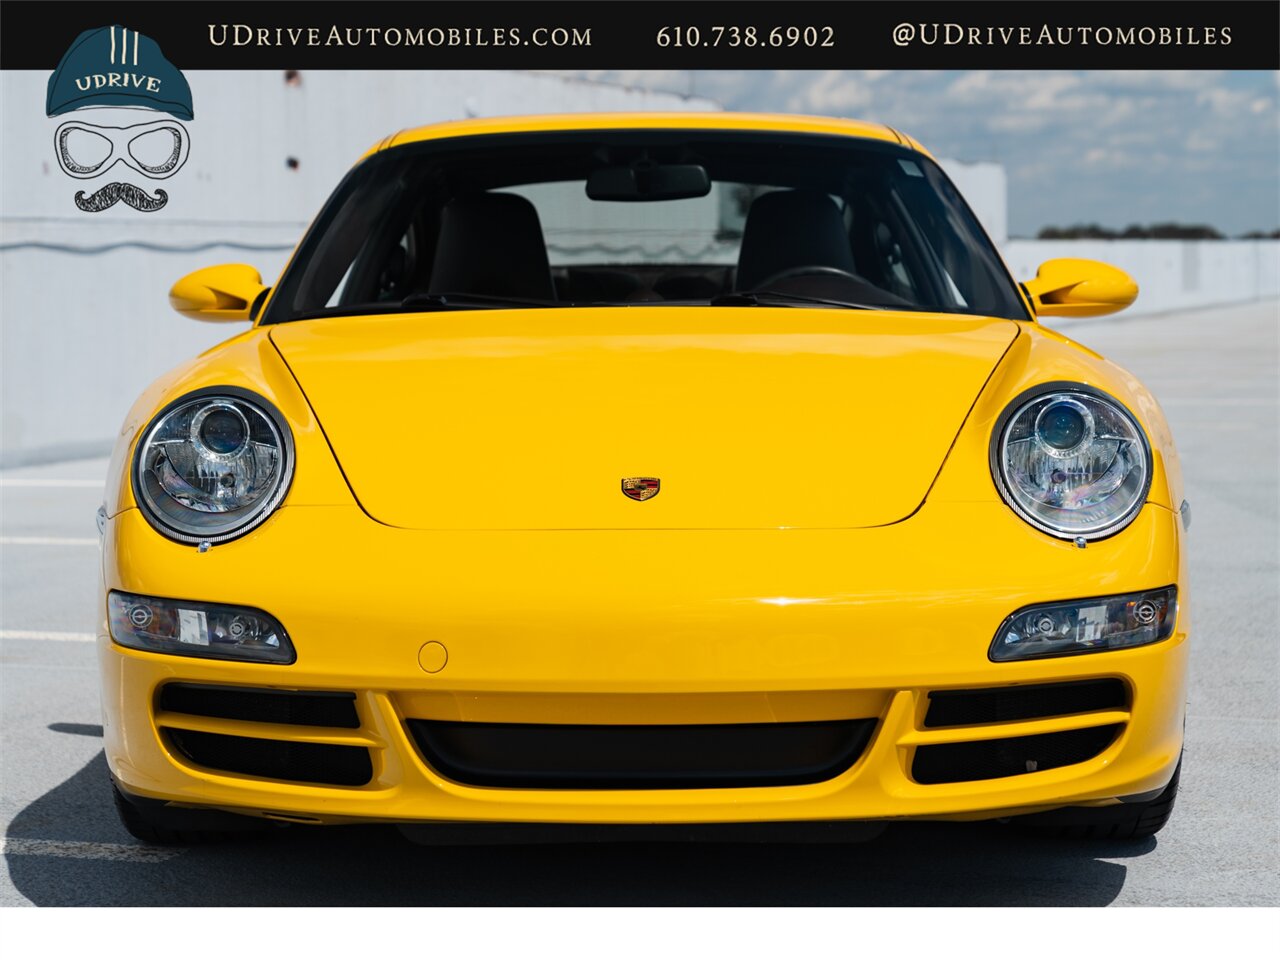 2006 Porsche 911 Carrera 4S  997 C4S 6 Speed Cocoa Full Lthr Chrono Sport Exhaust Special Color Combo - Photo 13 - West Chester, PA 19382